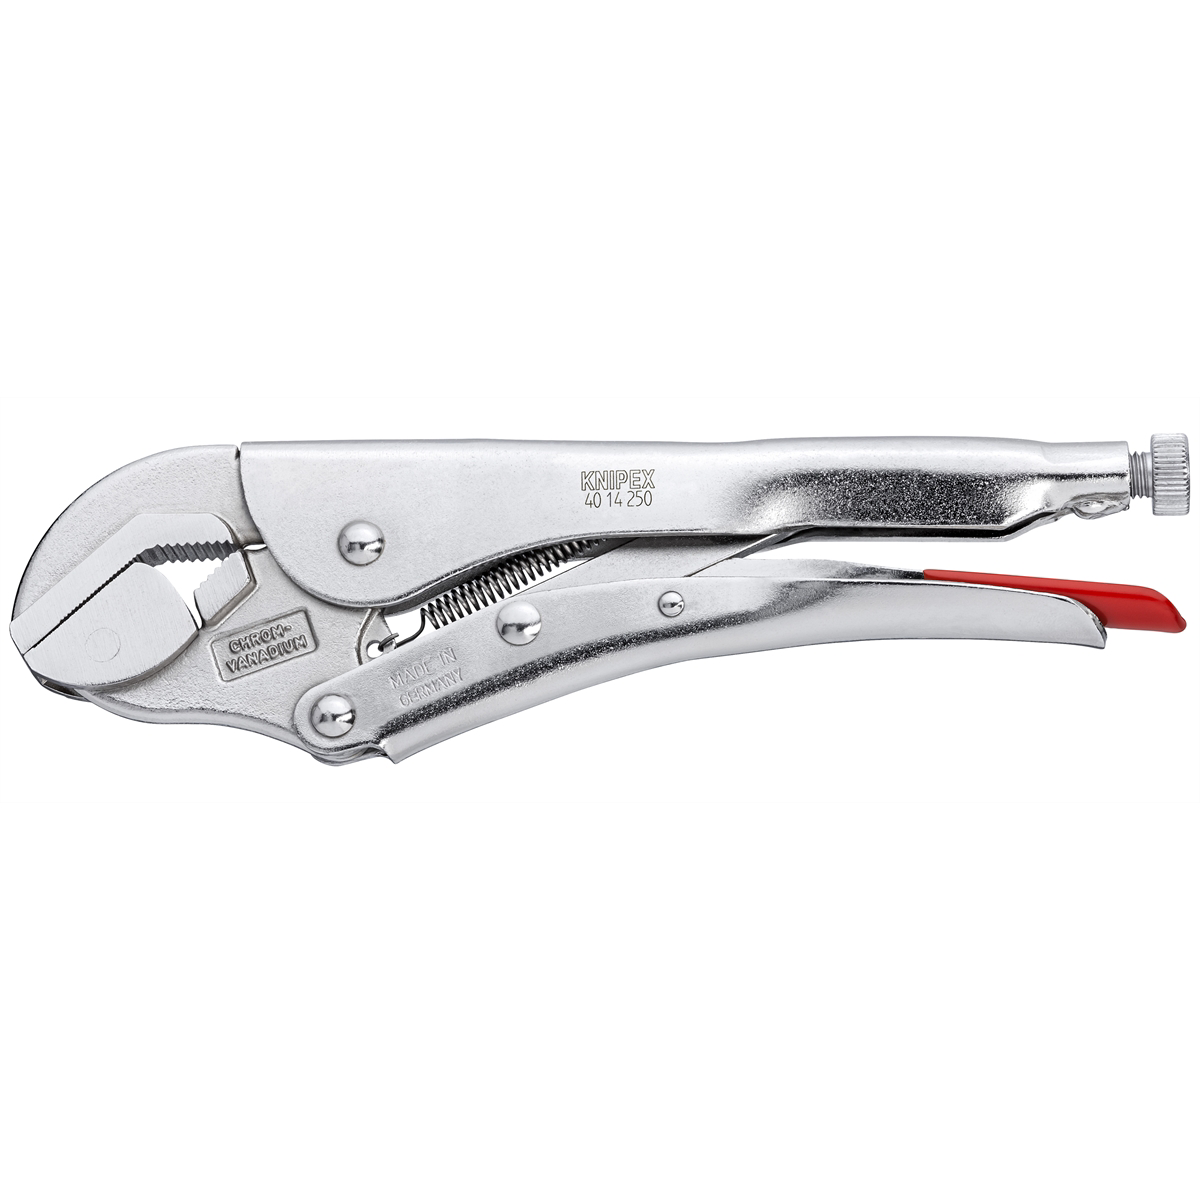 10 inch Pivoting Grip Pliers